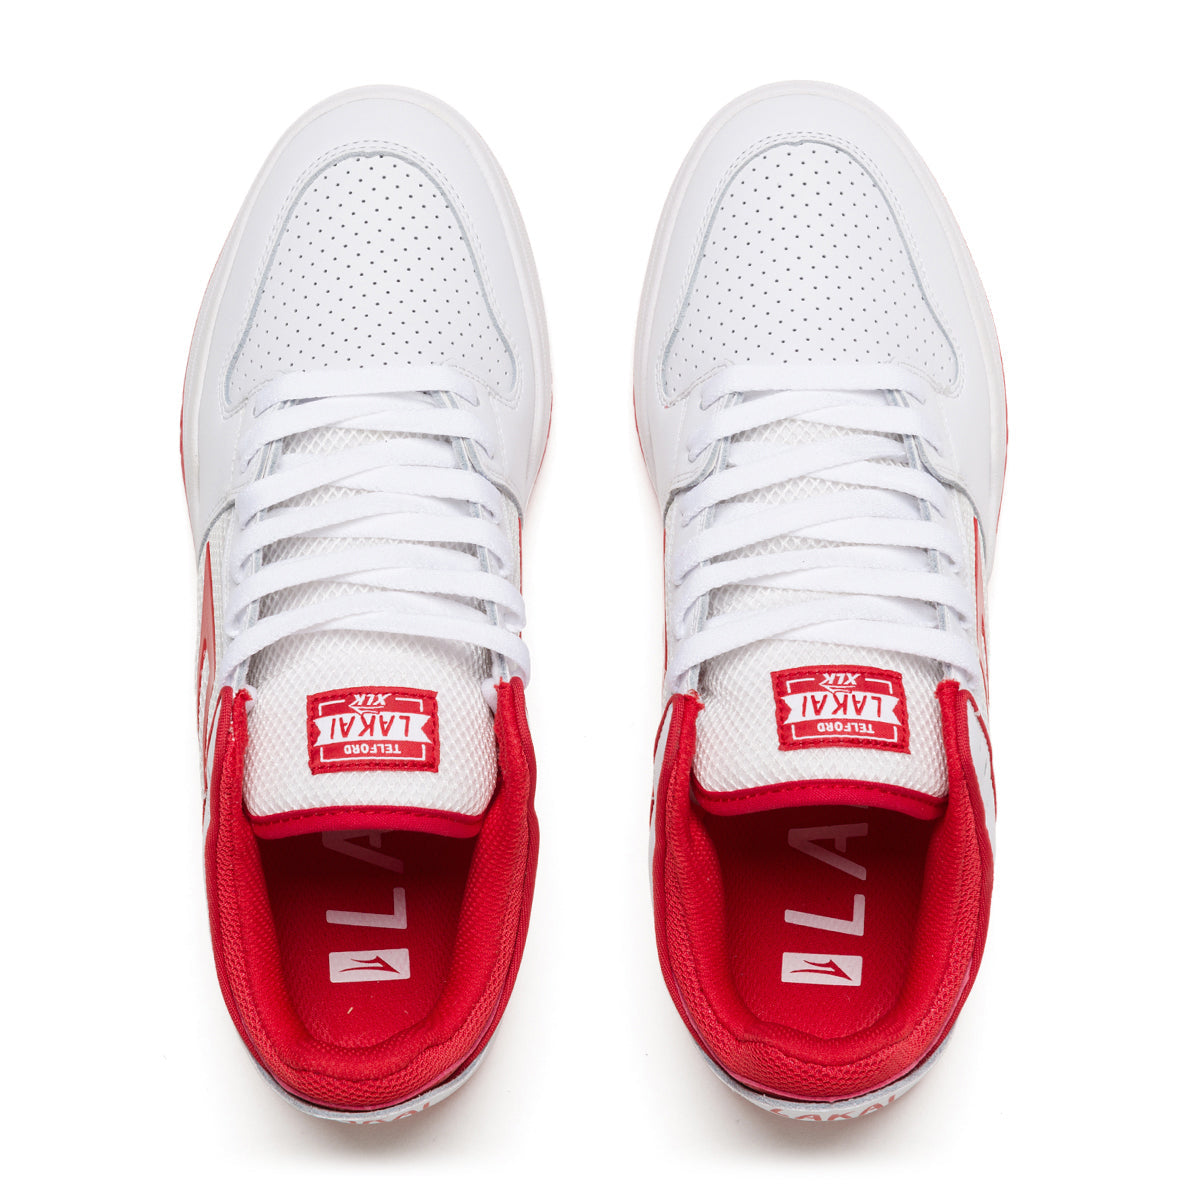 LAKAI - Telford Low Shoes White/Red Suede – 8FIVE